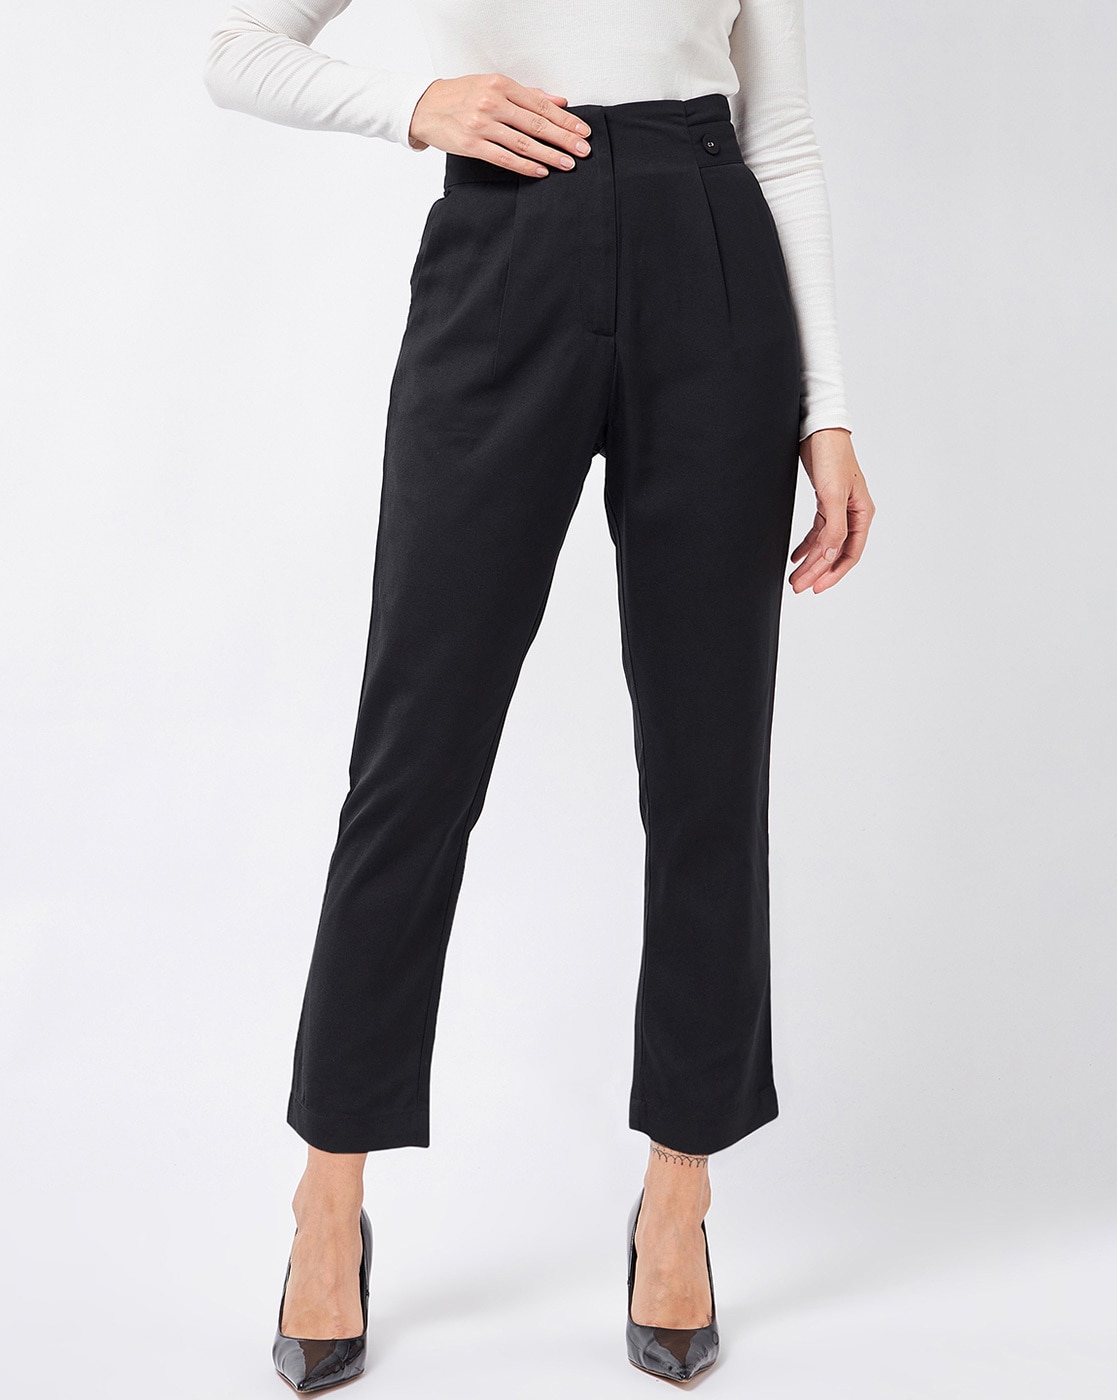 Buy COVER STORY Black Womens Solid Ankle Length Trousers | Shoppers Stop